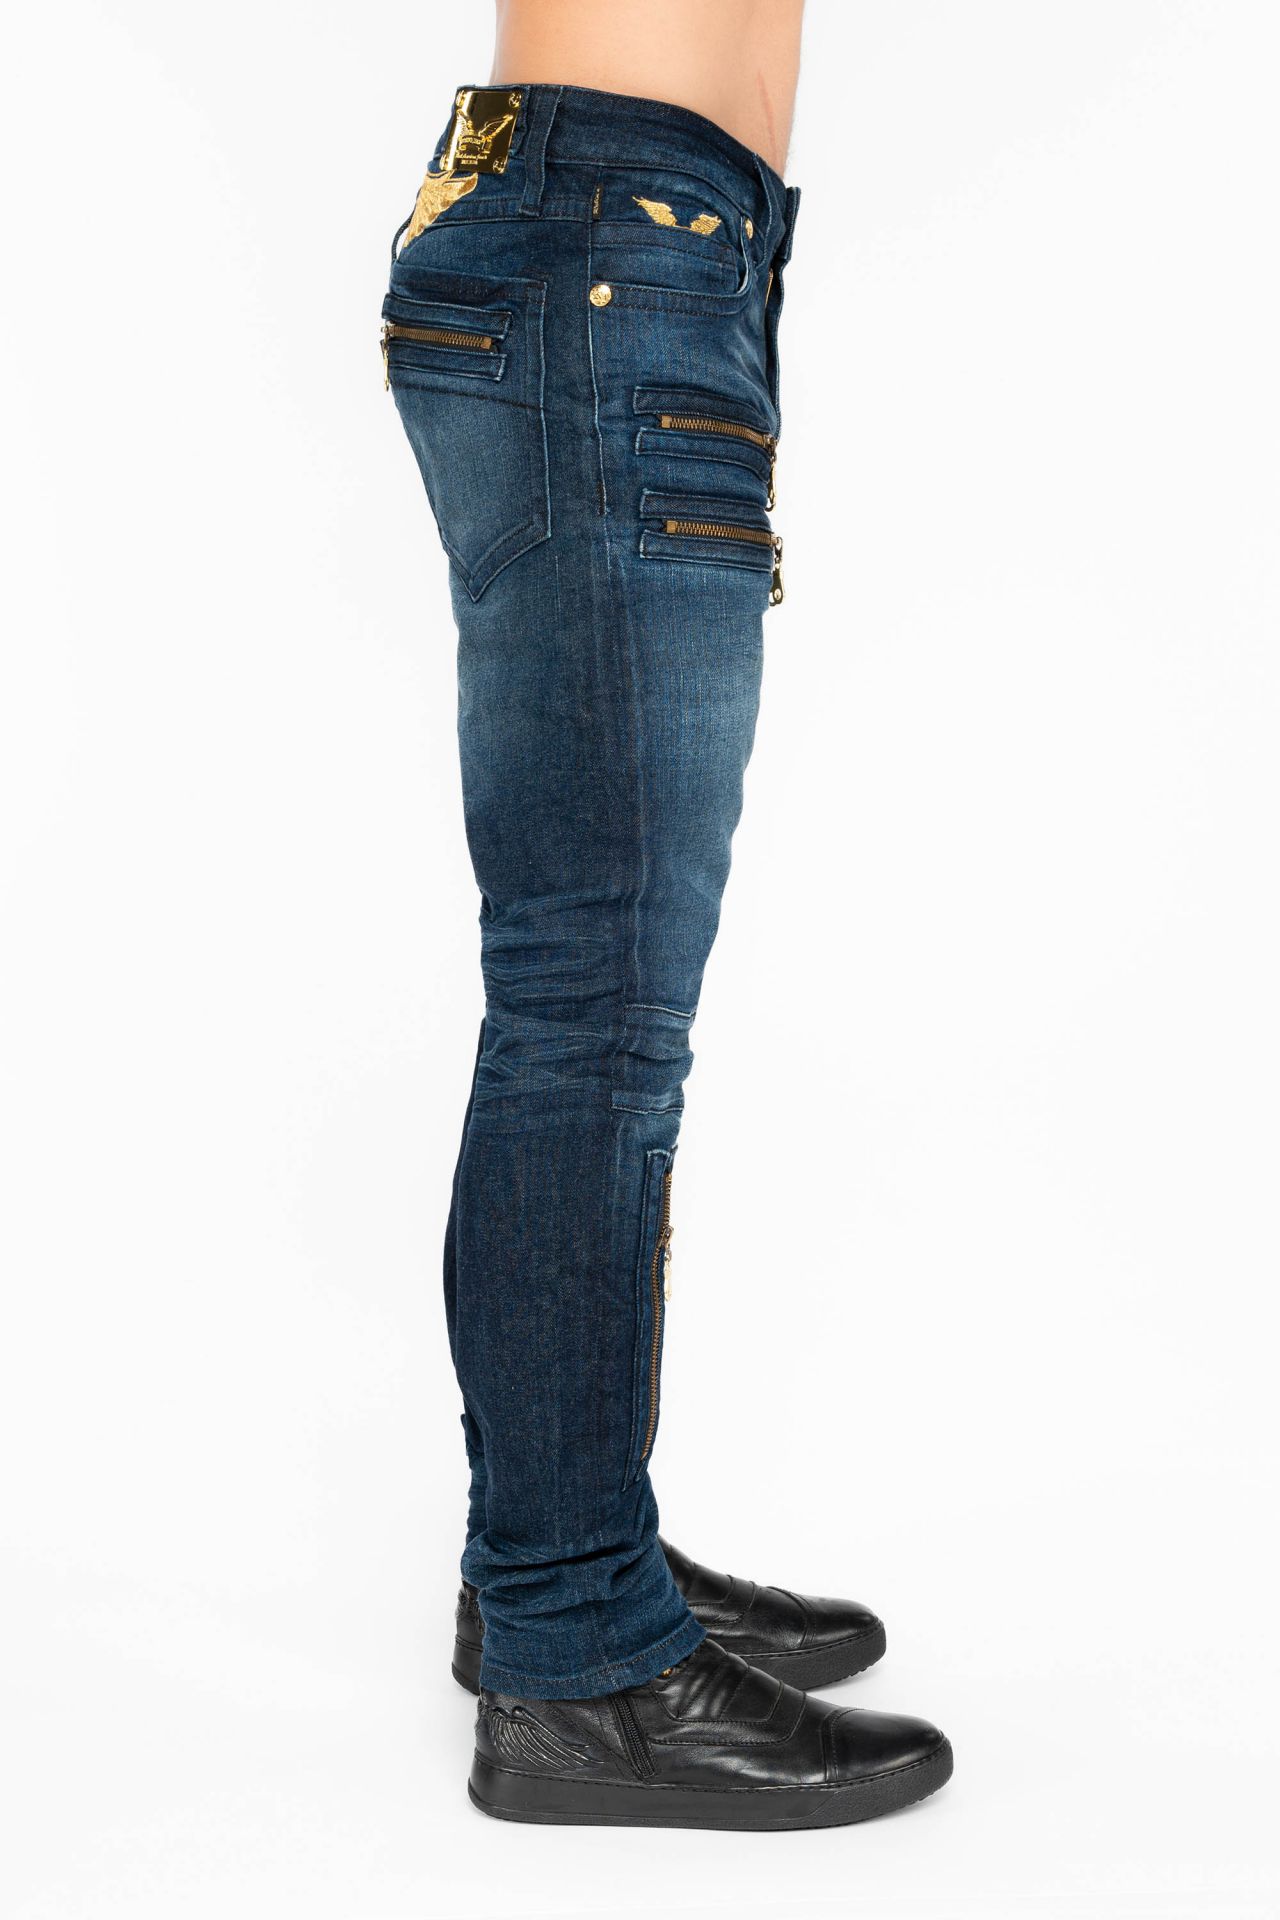 MENS NEW BIKER SKINNY JEANS IN LIBERTY DARK BLUE WITH GOLD WINGS